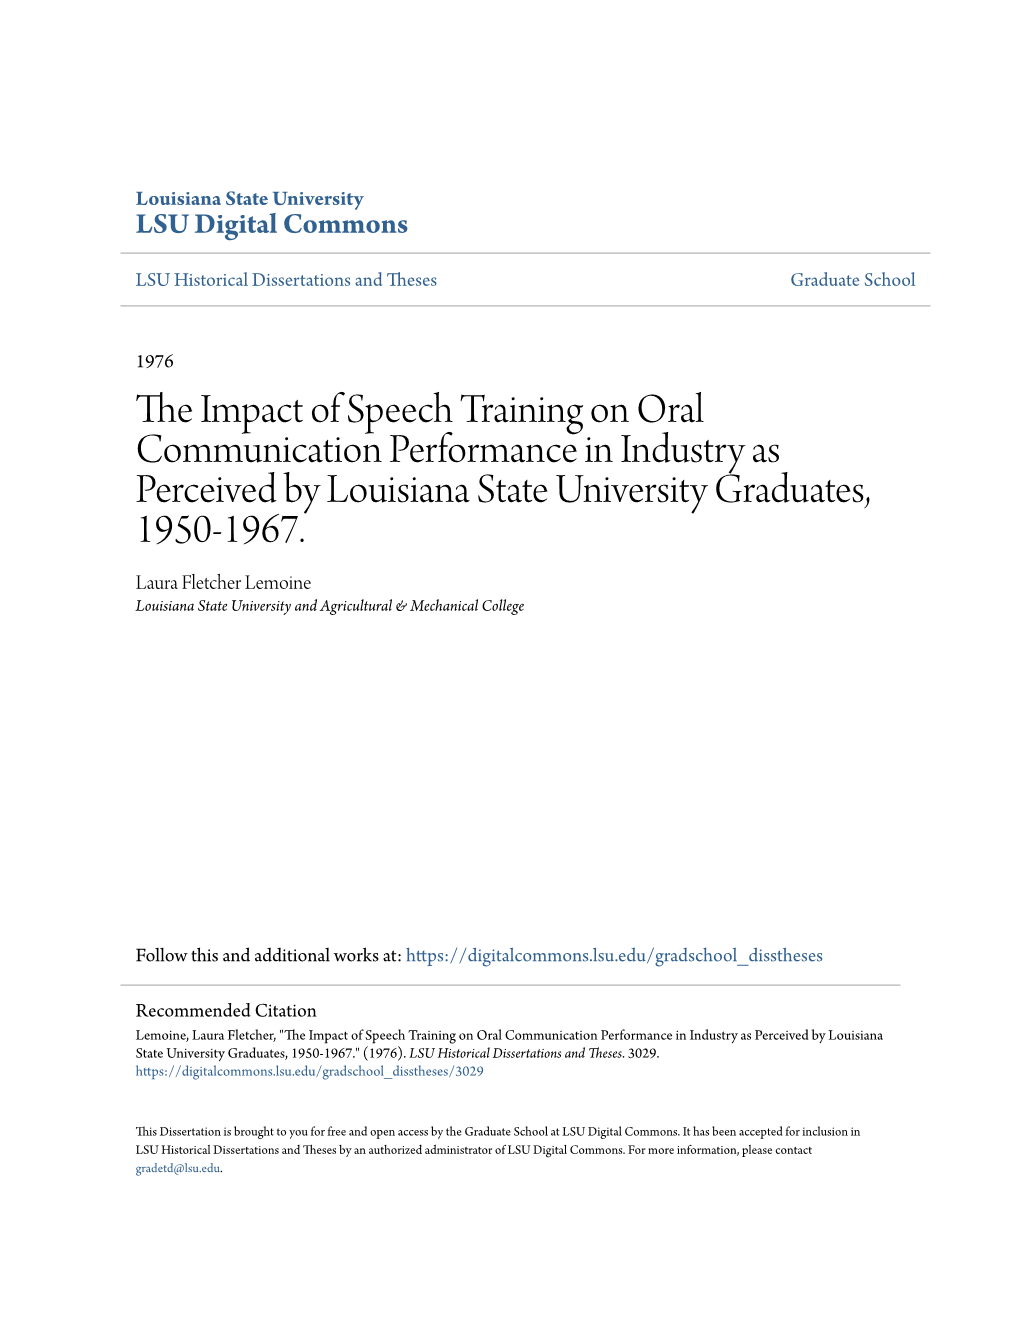 The Impact of Speech Training on Oral Communication Performance in Industry As Perceived by Louisiana State University Graduates, 1950-1967